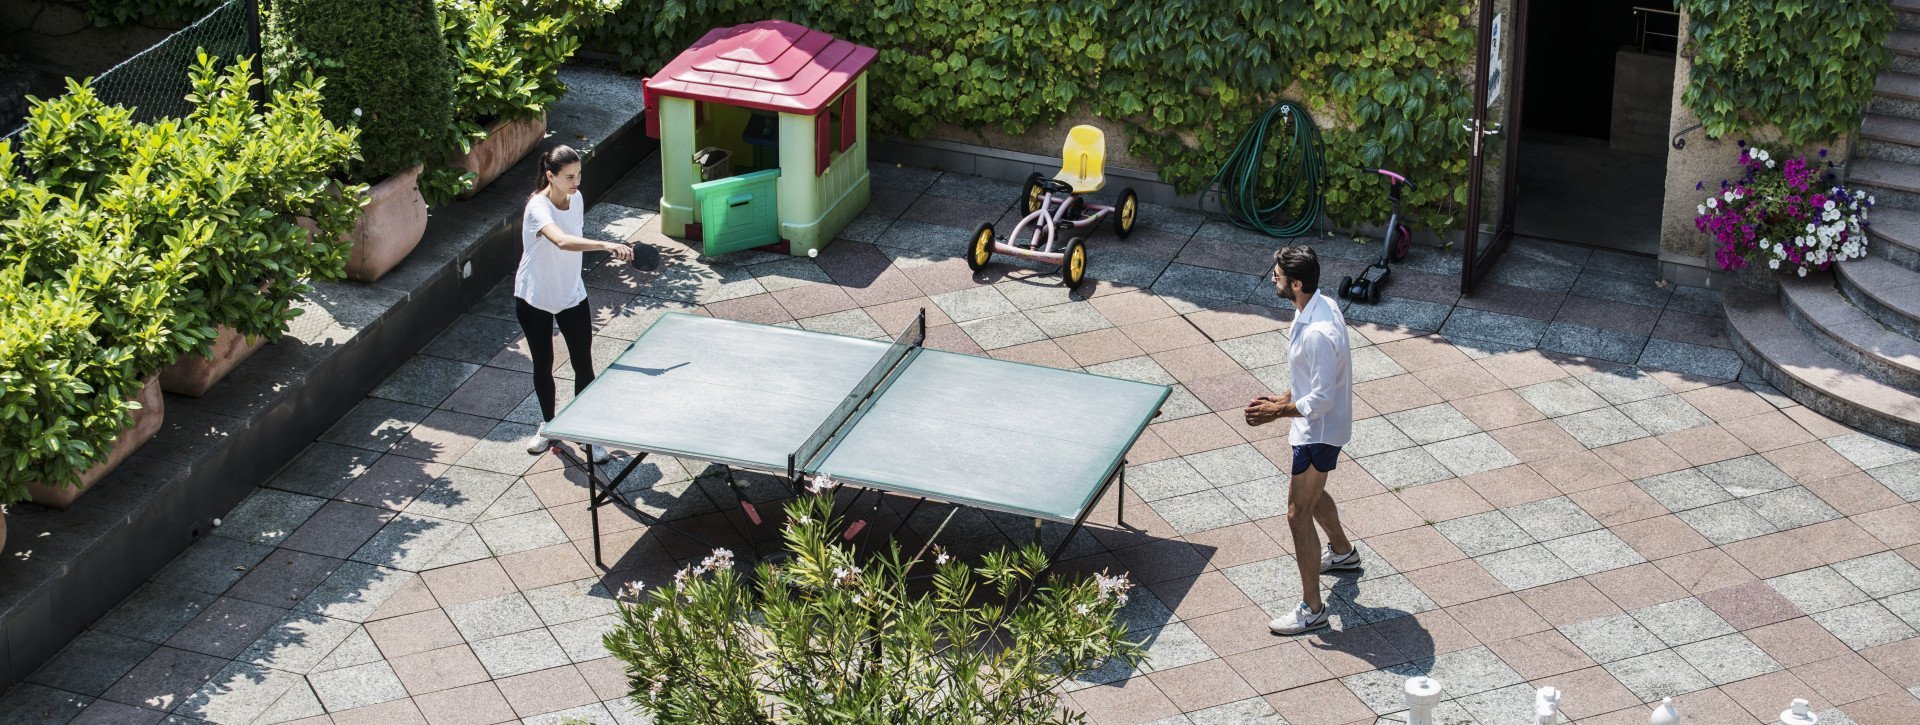 A couple is playing ping pong in the hotels garden